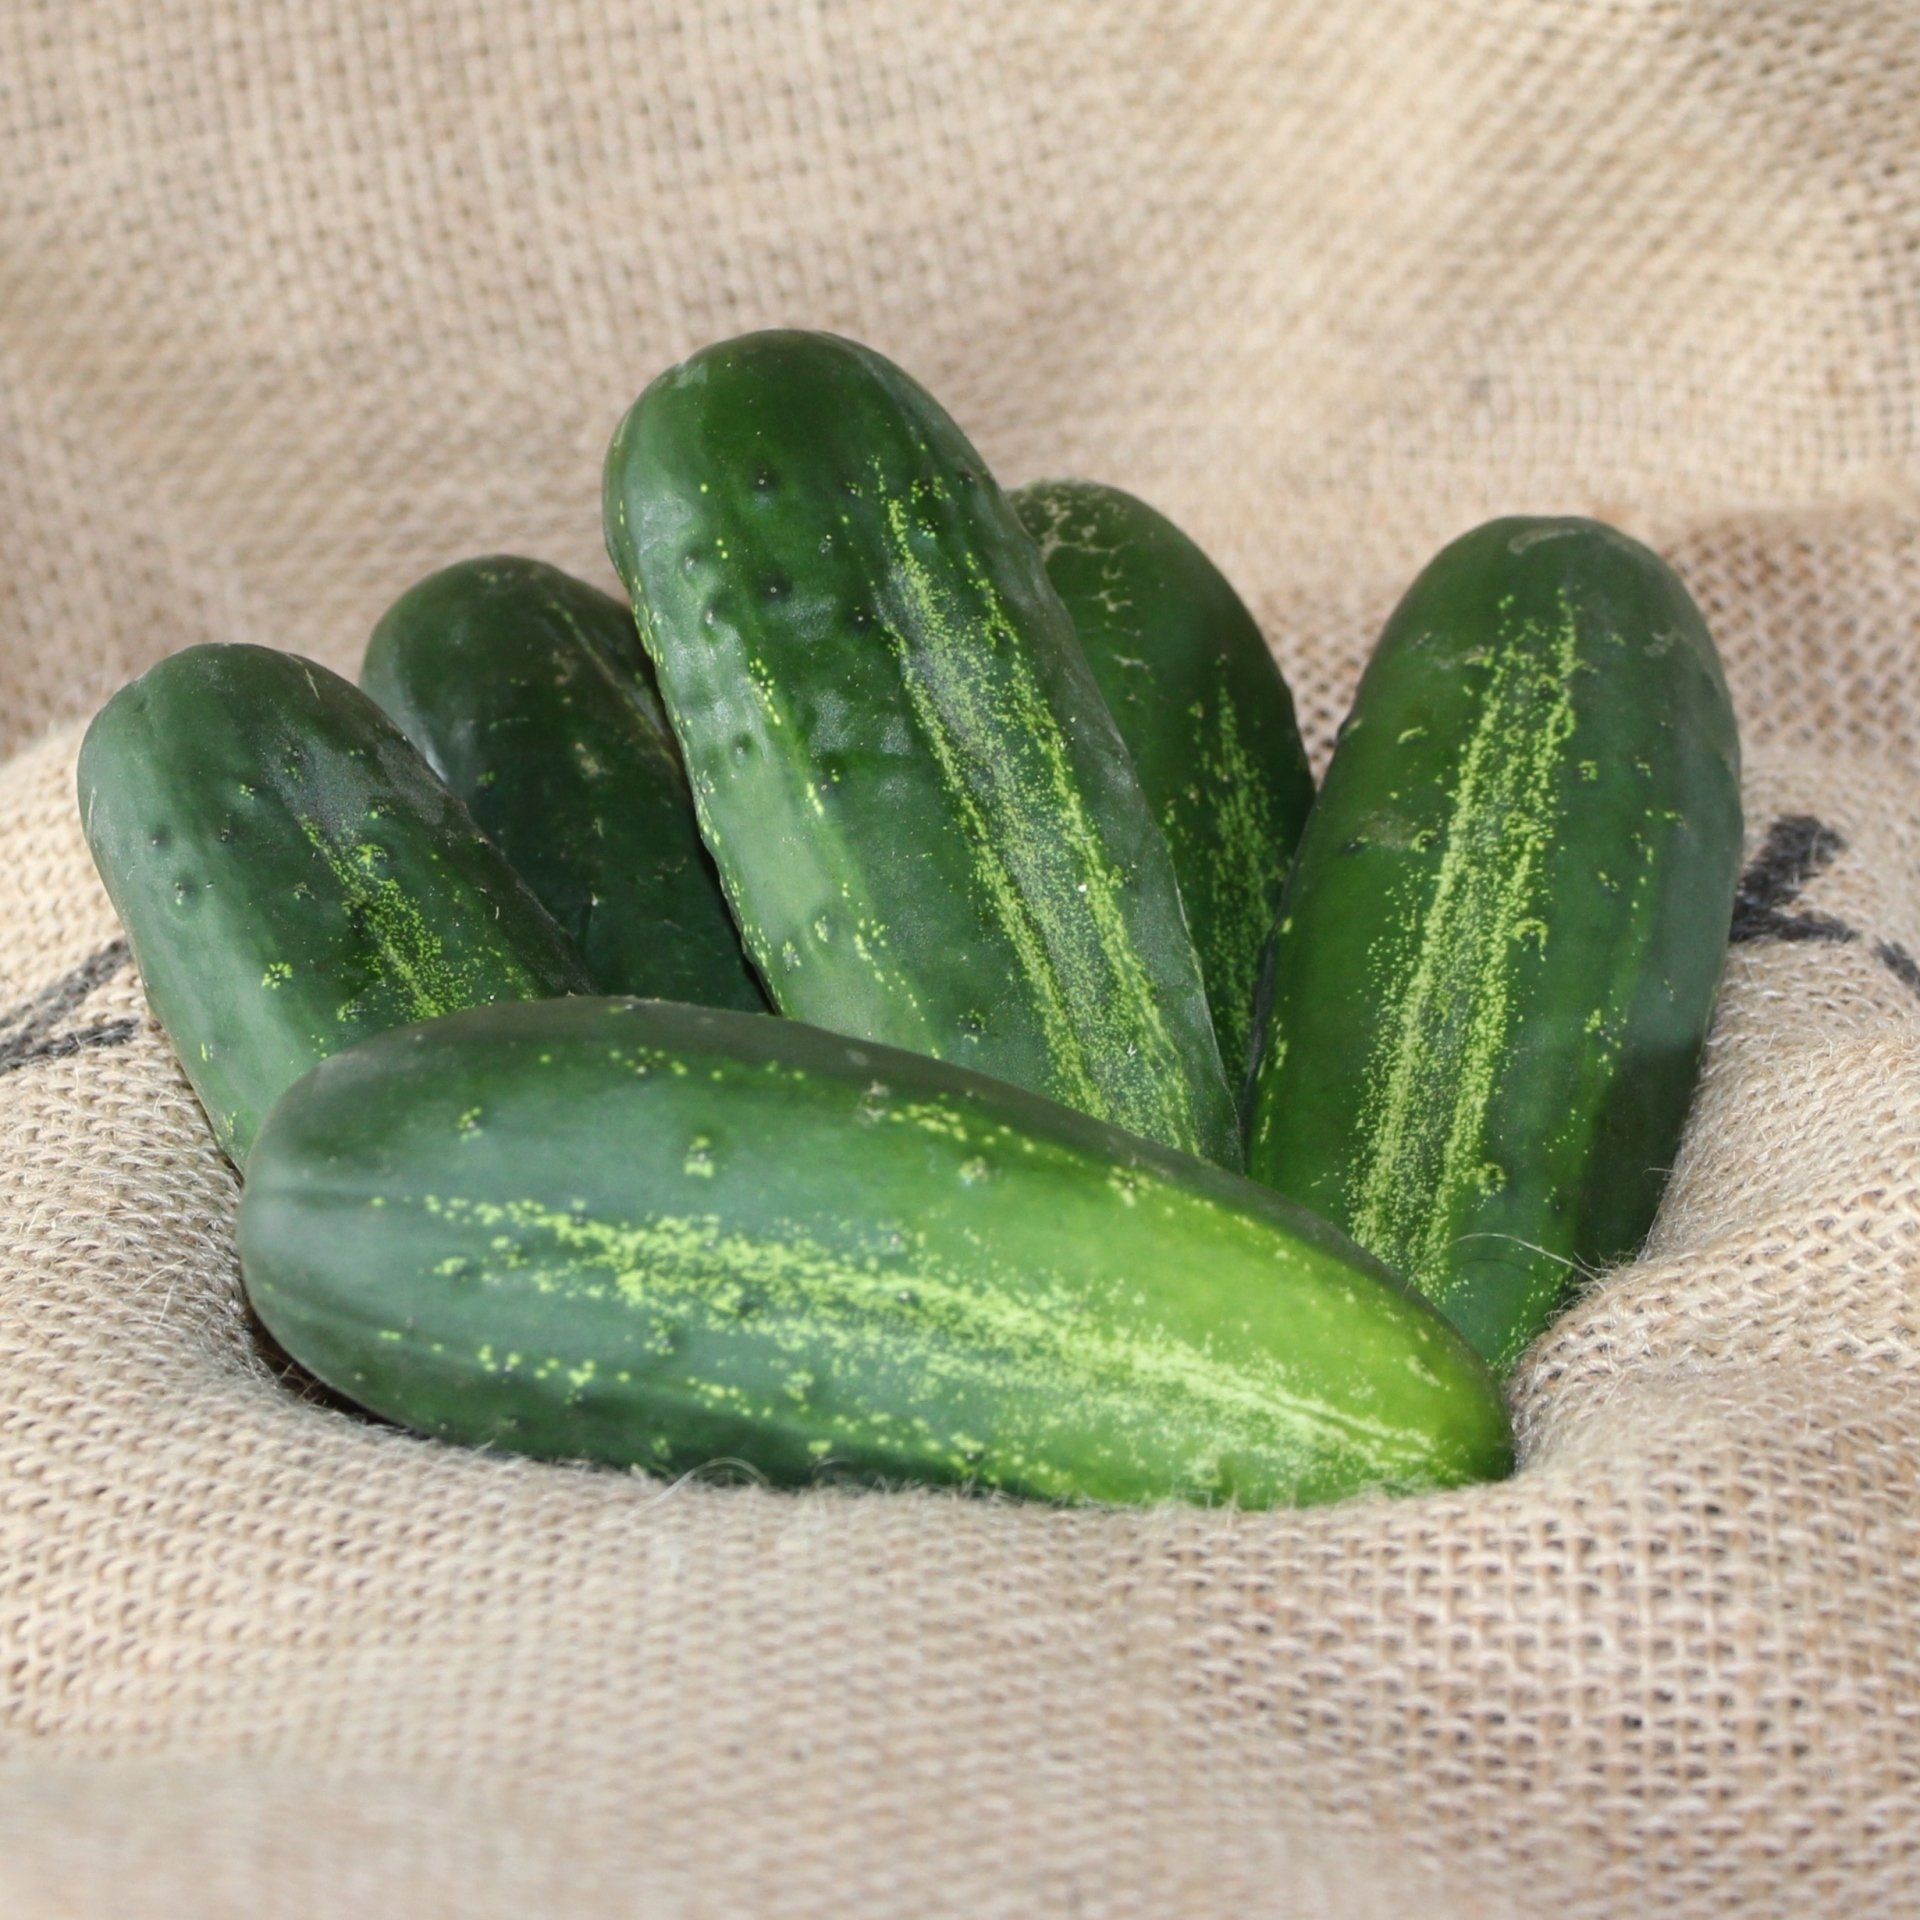 locally grown cucumbers